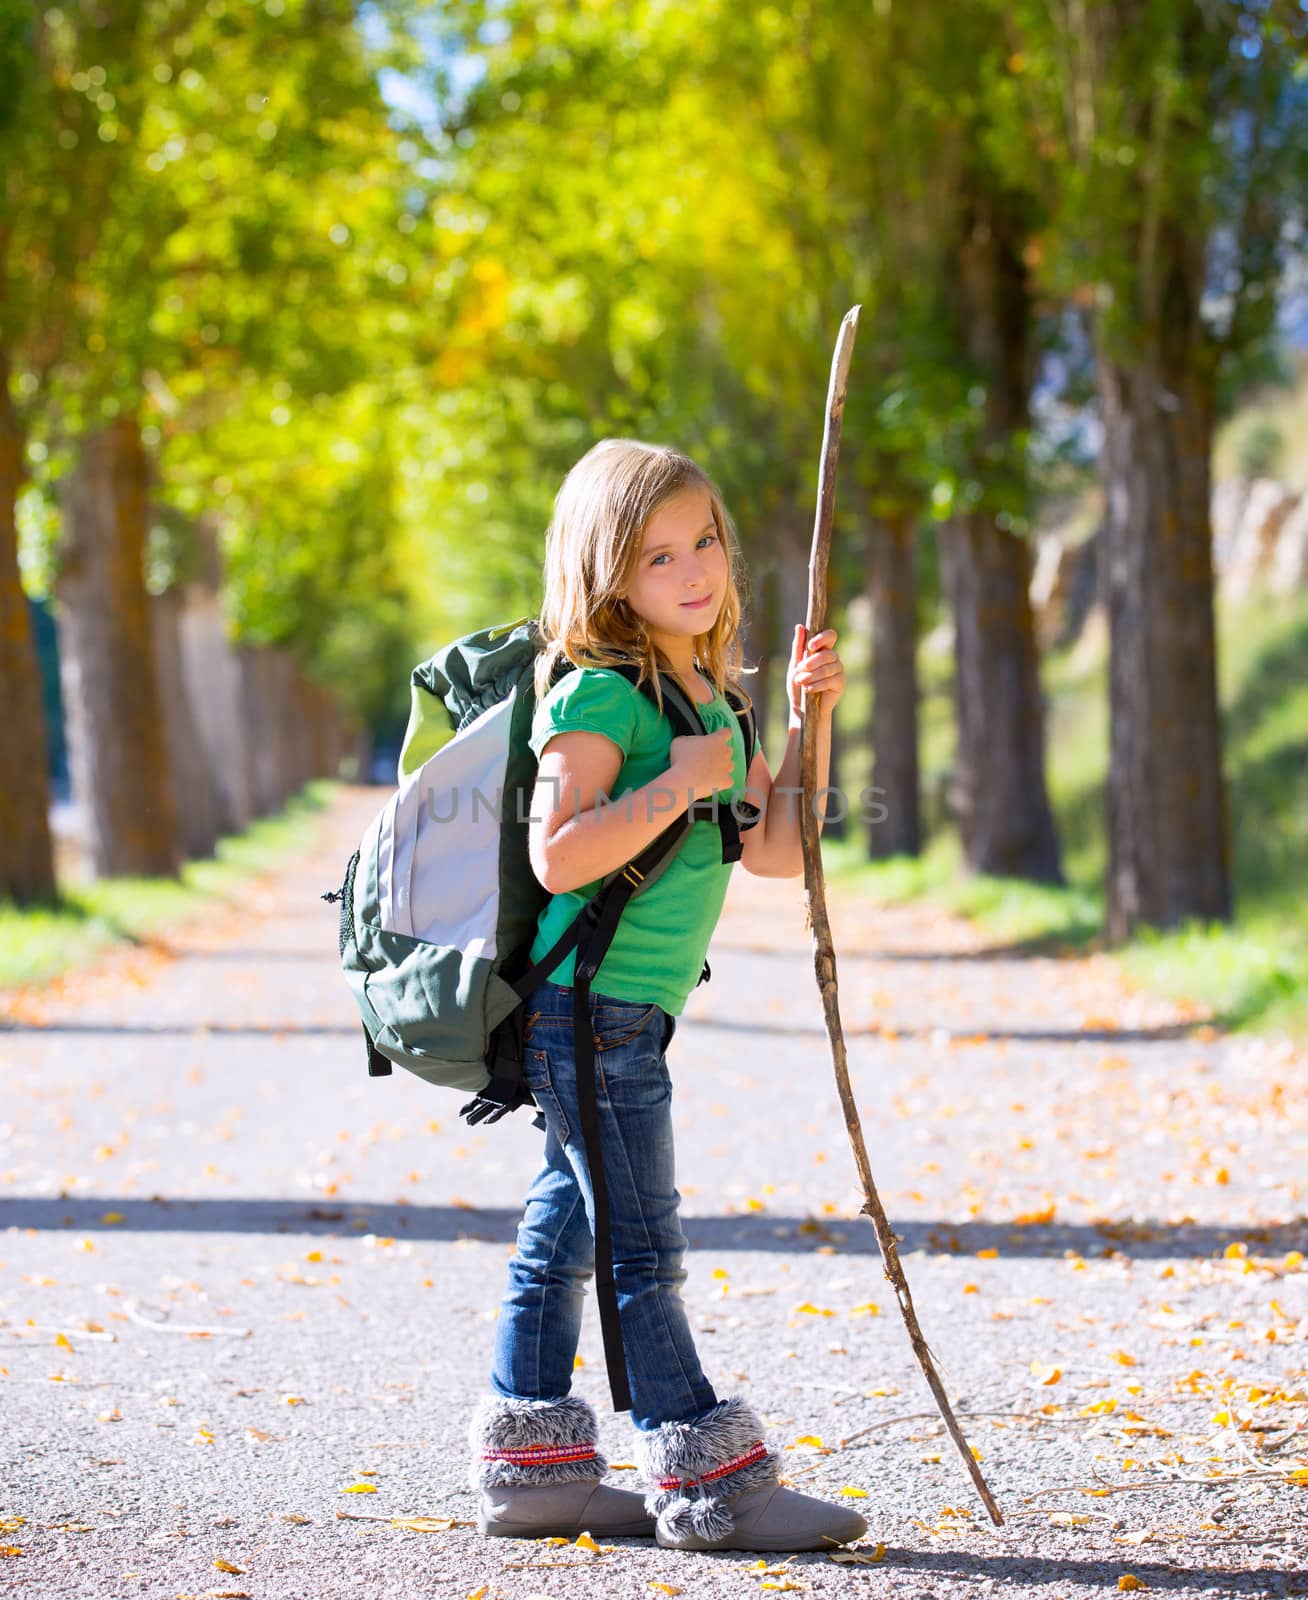 Blond explorer kid girl walking with backpack hiking in autumn trees track holding stick